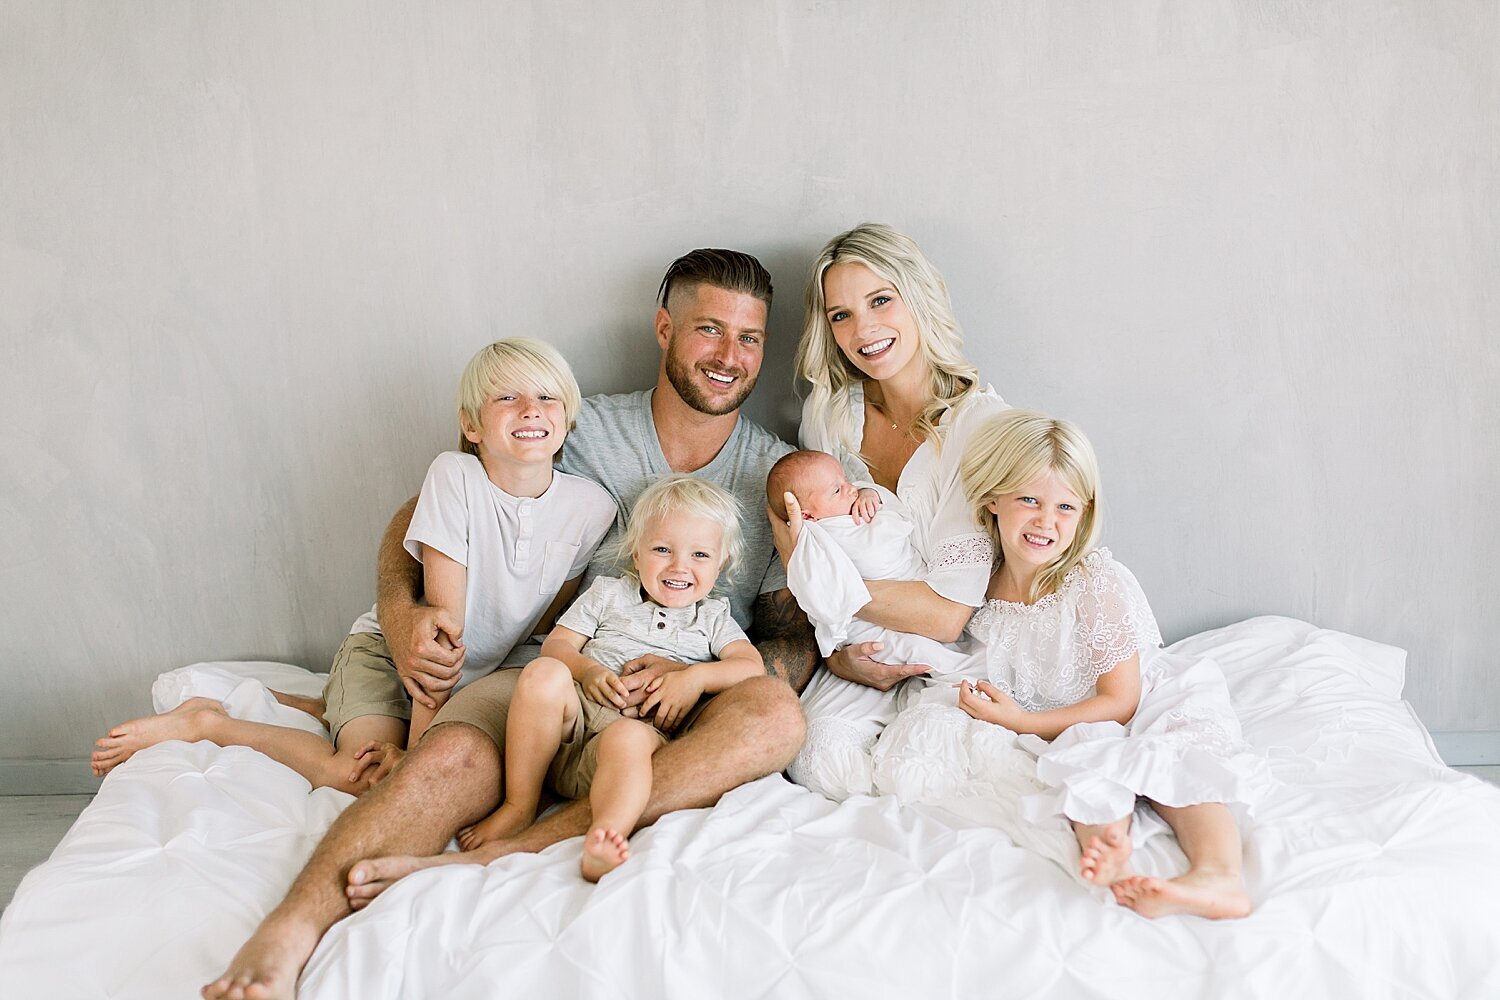 Family photo of Mom, Dad and 4 kids during newborn session in Newport Beach with Ambre Williams Photography.